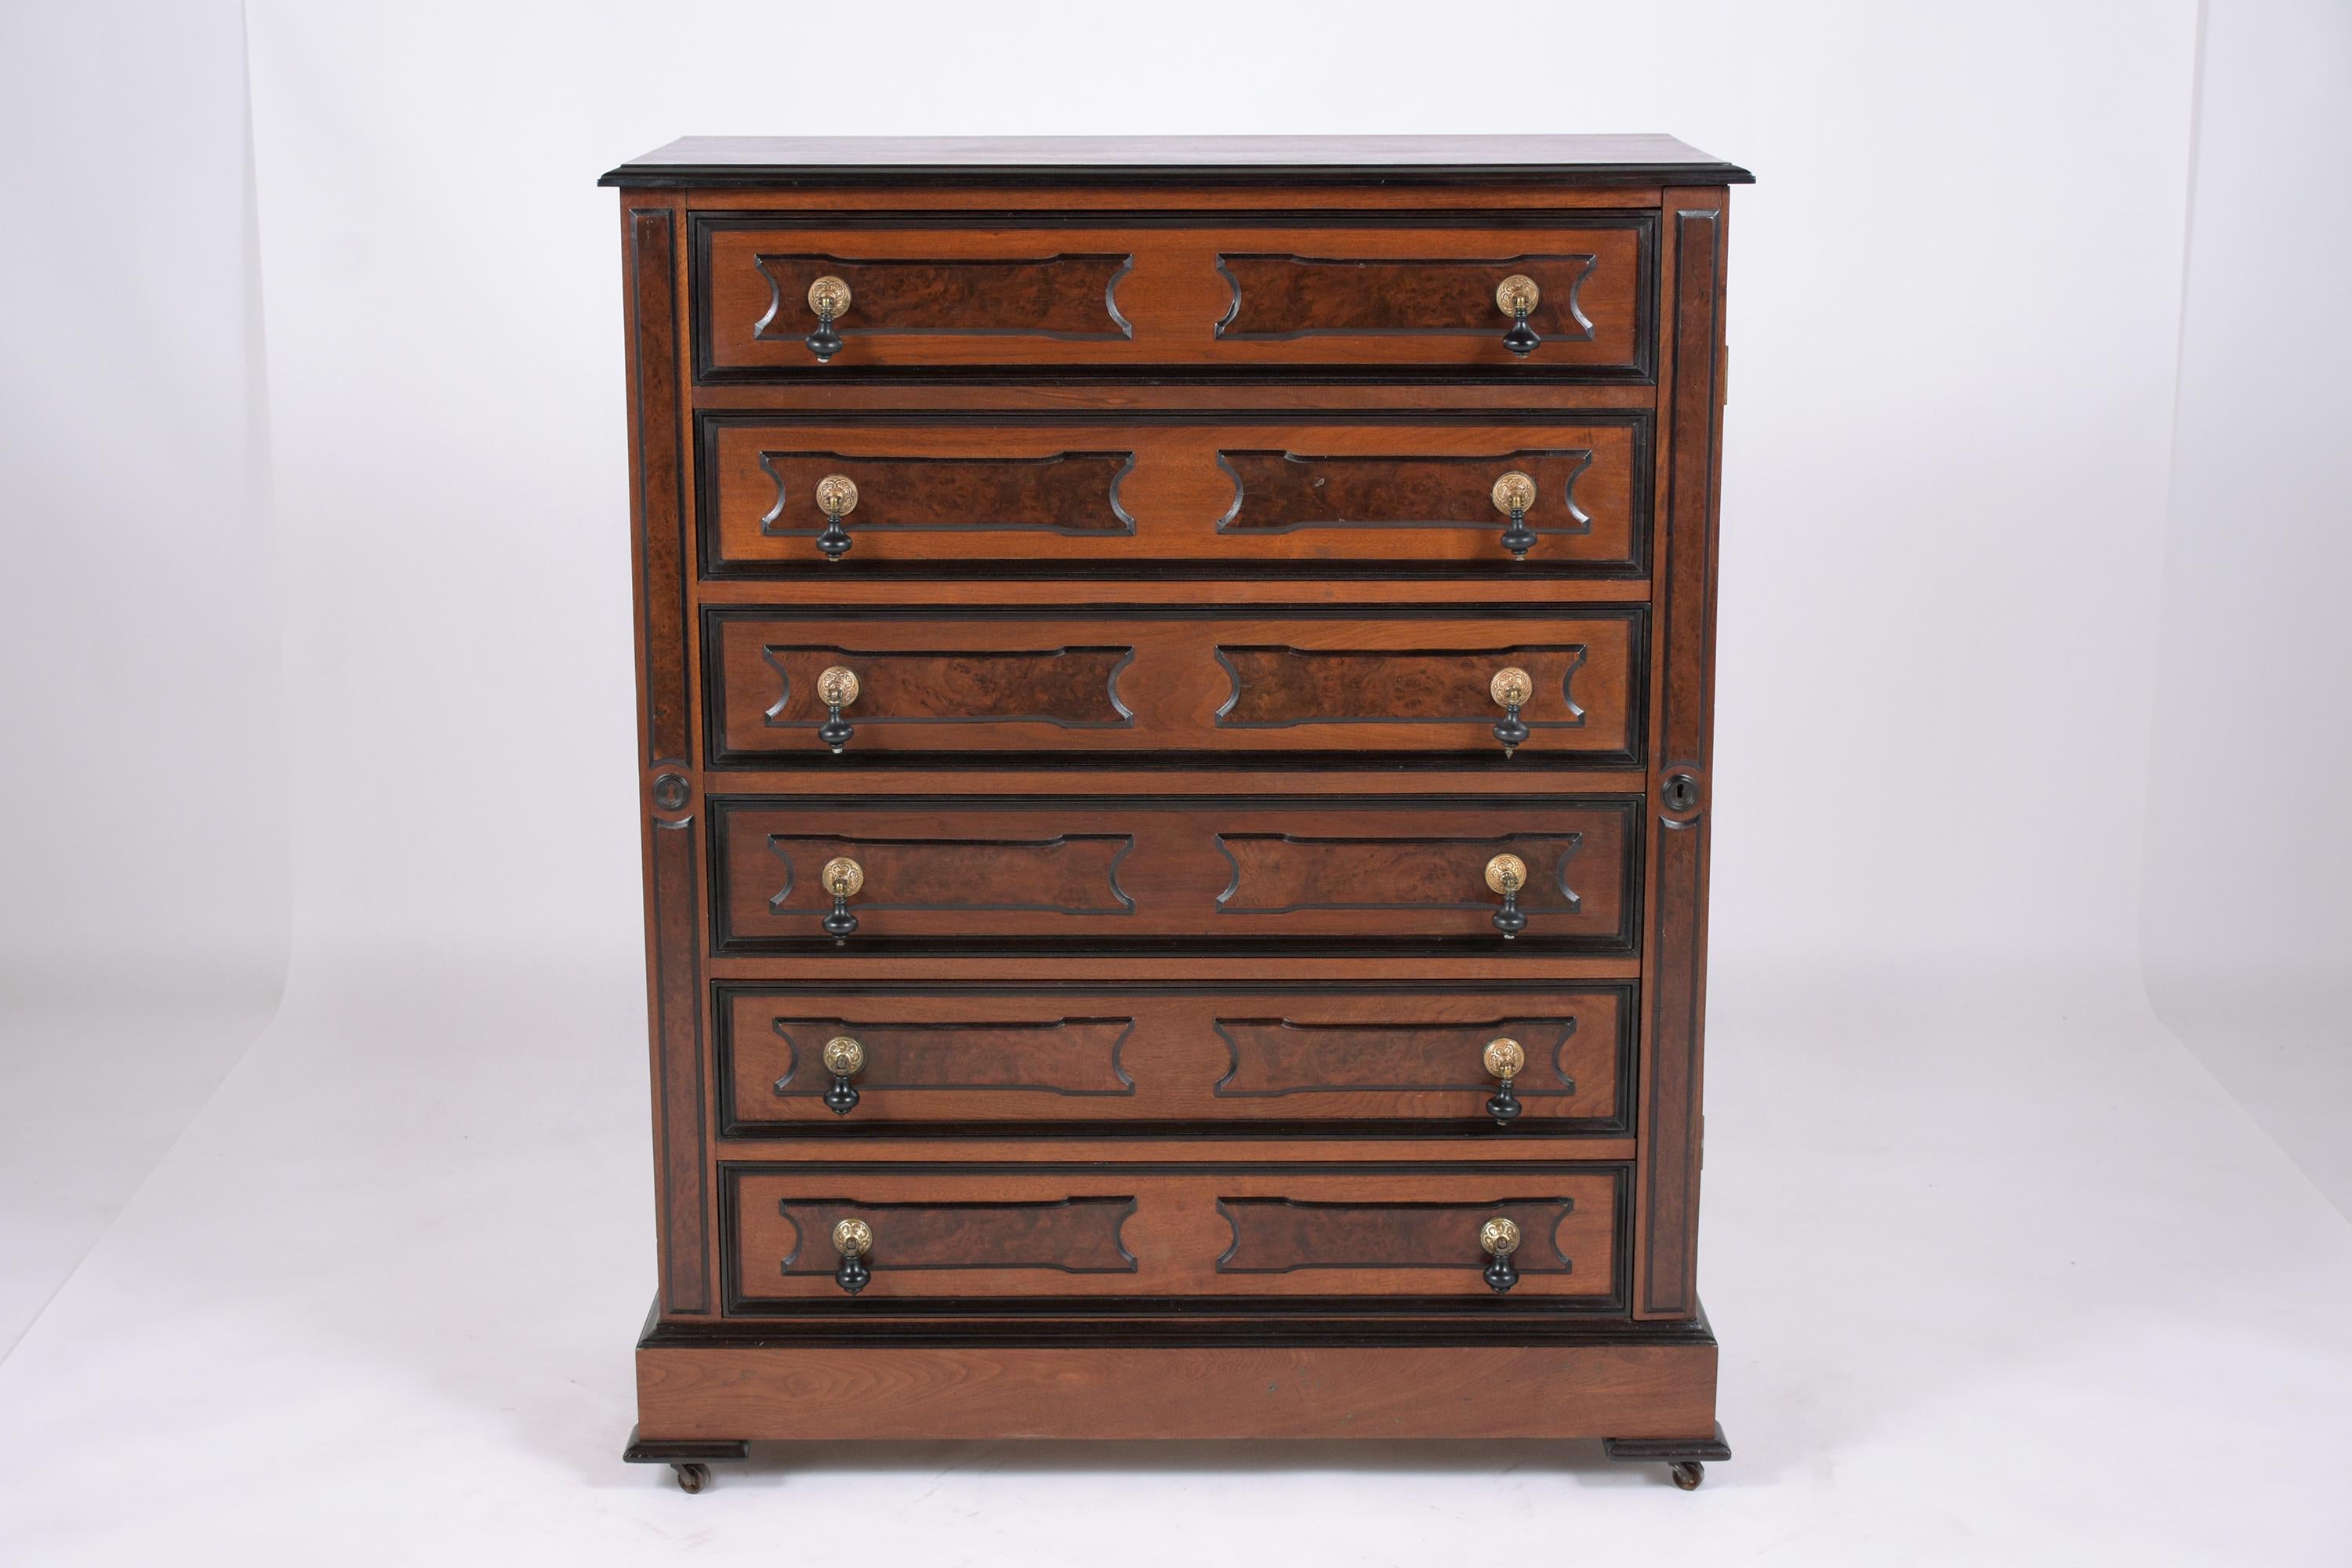 An extraordinary late 19th-century empire chest of drawers in great condition beautiful crafted out of mahogany wood that has been completely restored by our craftsmen team. This 1880s chest is eye-catching featuring a rich mahogany color with